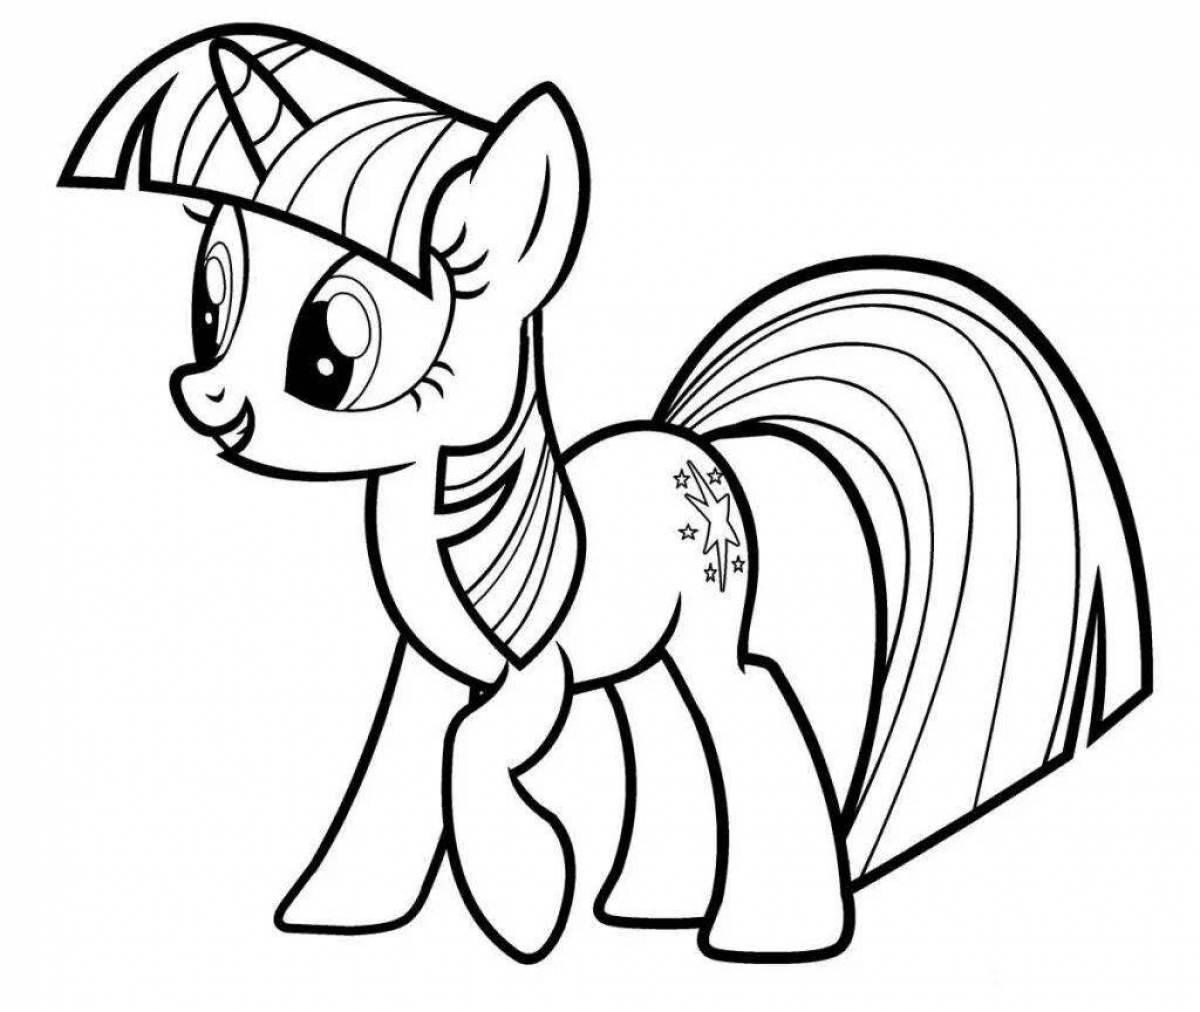 Exquisite pony light coloring page